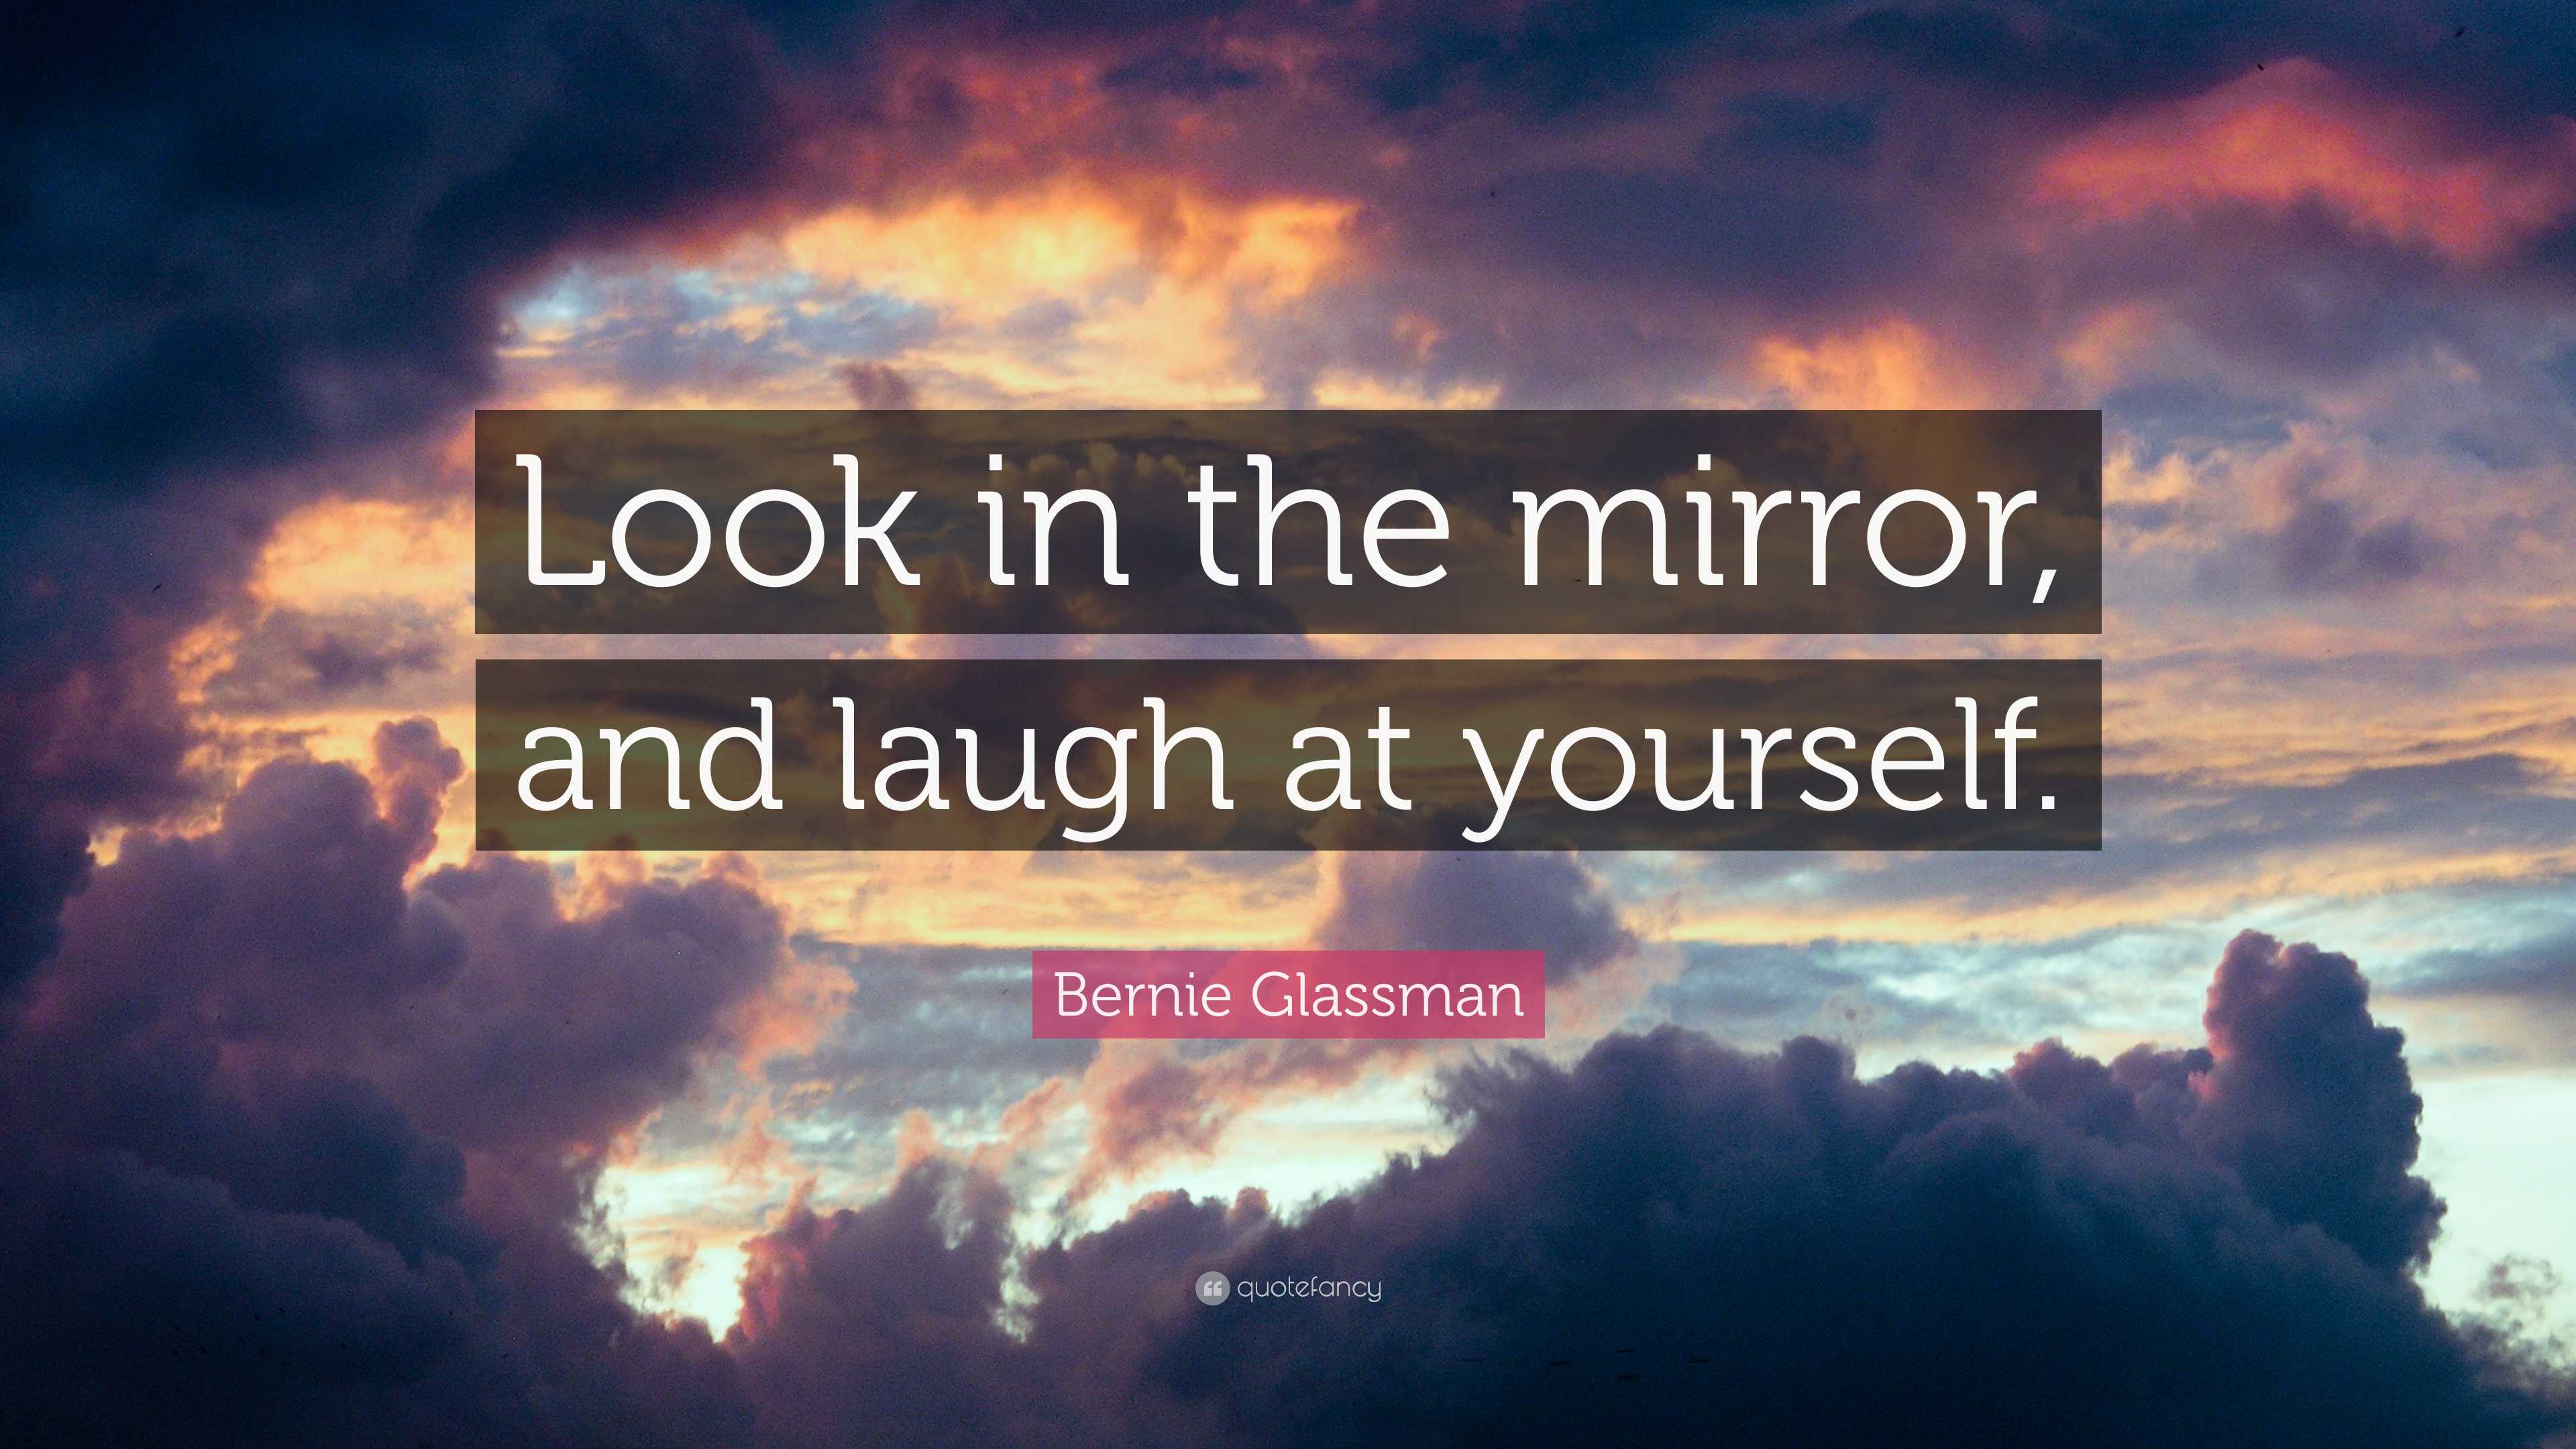 Bernie Glassman Quote: “Look in the mirror, and laugh at yourself.”